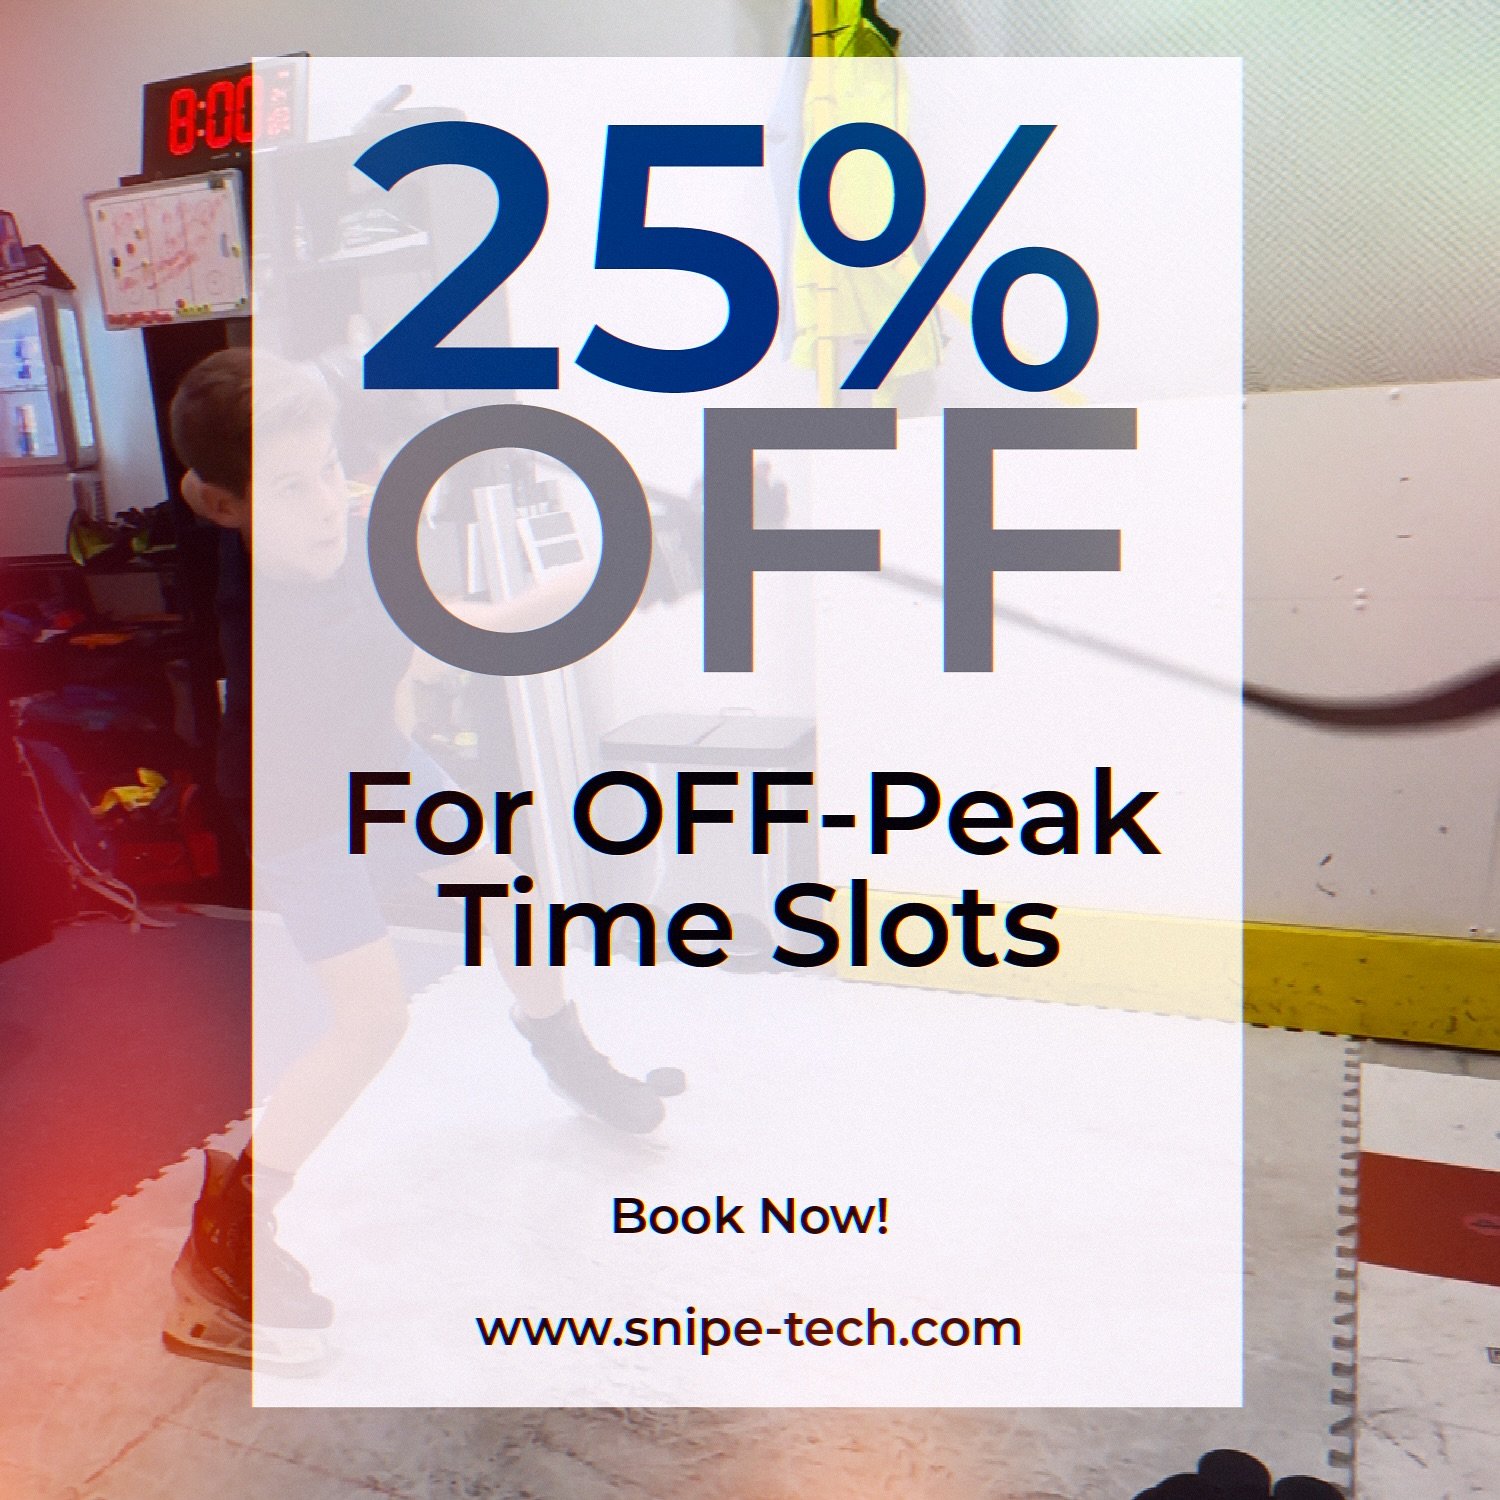 25% Discount For Off-Peak hours now available for booking!
Don&rsquo;t wait and book yours now at www.snipe-tech.com🏒✅